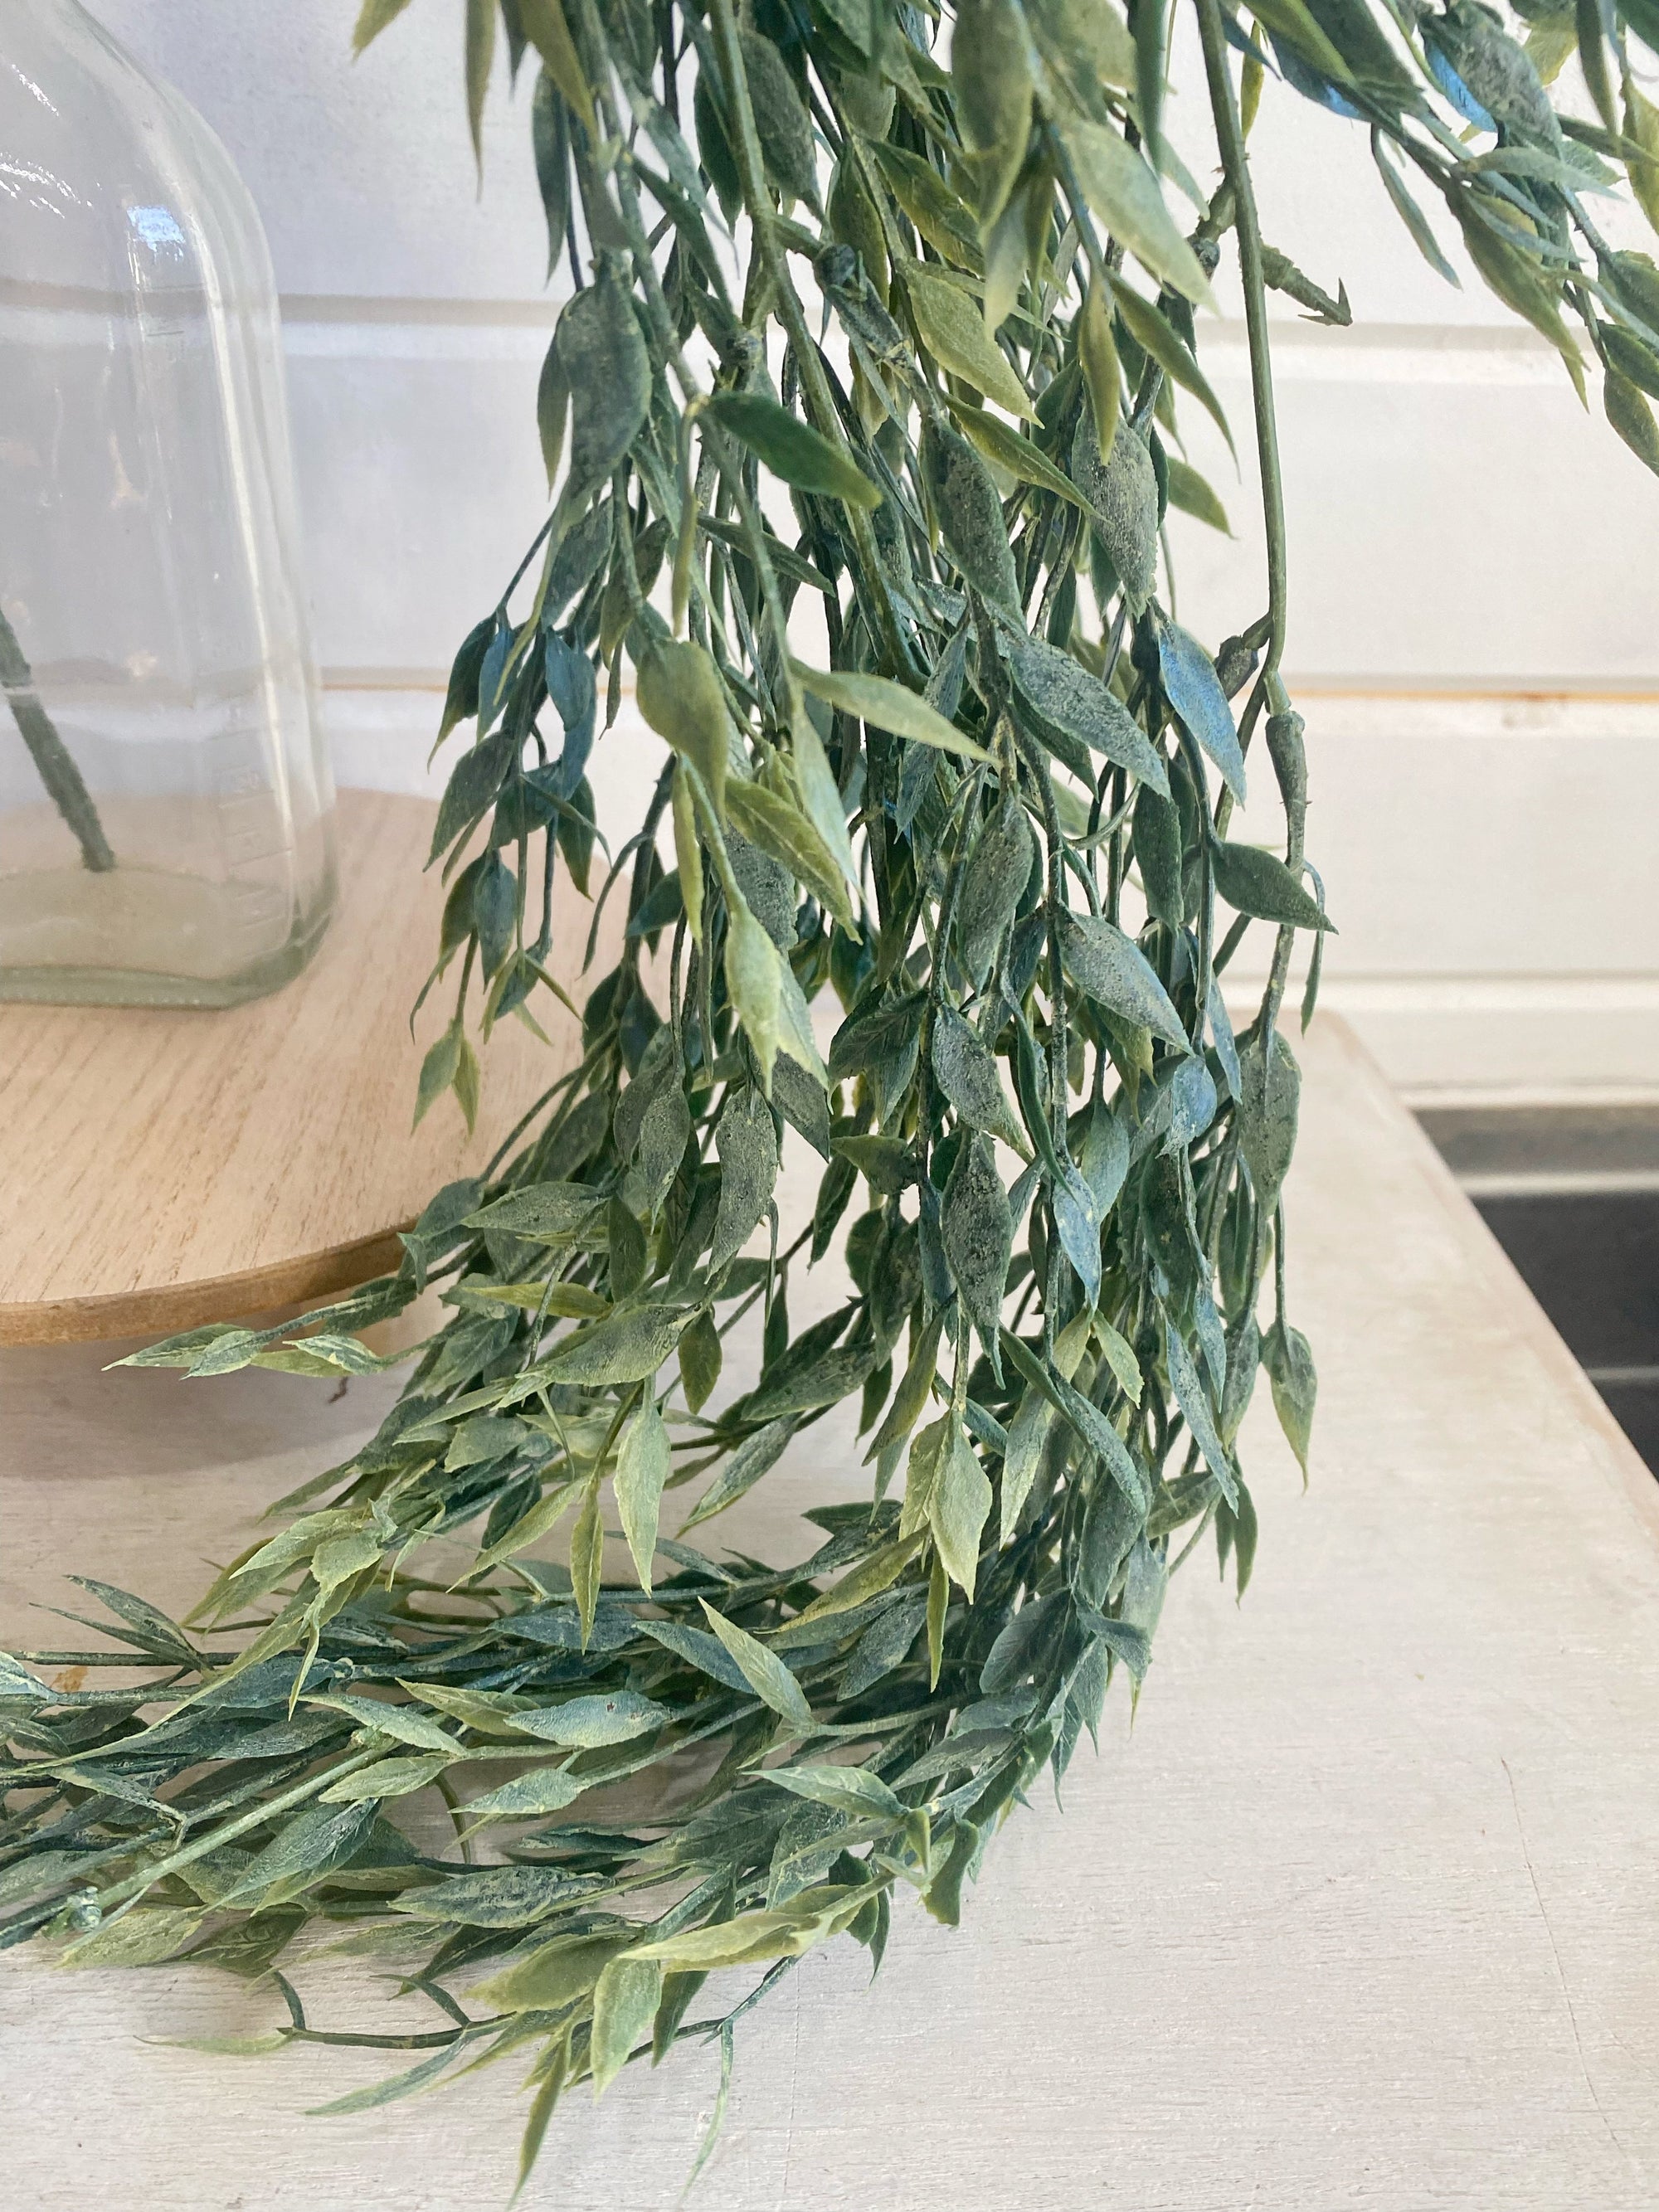 Large Ruscus Leaves- Artificial Greenery - 14 inches - Oh! You're Lovely -  Sola Wood Flowers